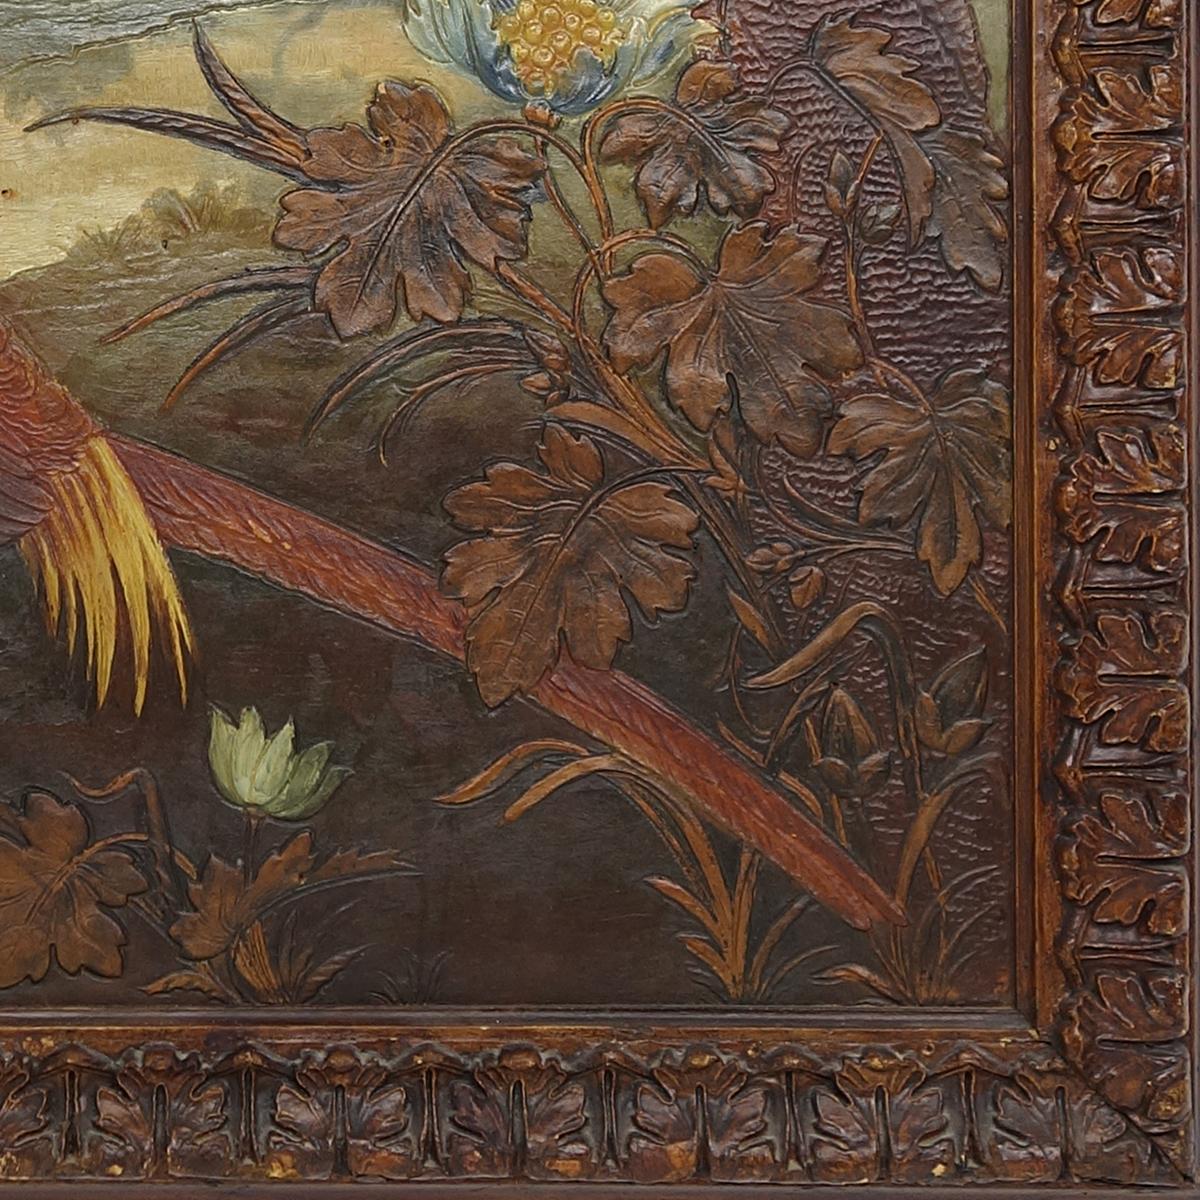 Painted Antique Oil Painting on Leather Depicting a Pheasant in Lush Natural Environment For Sale